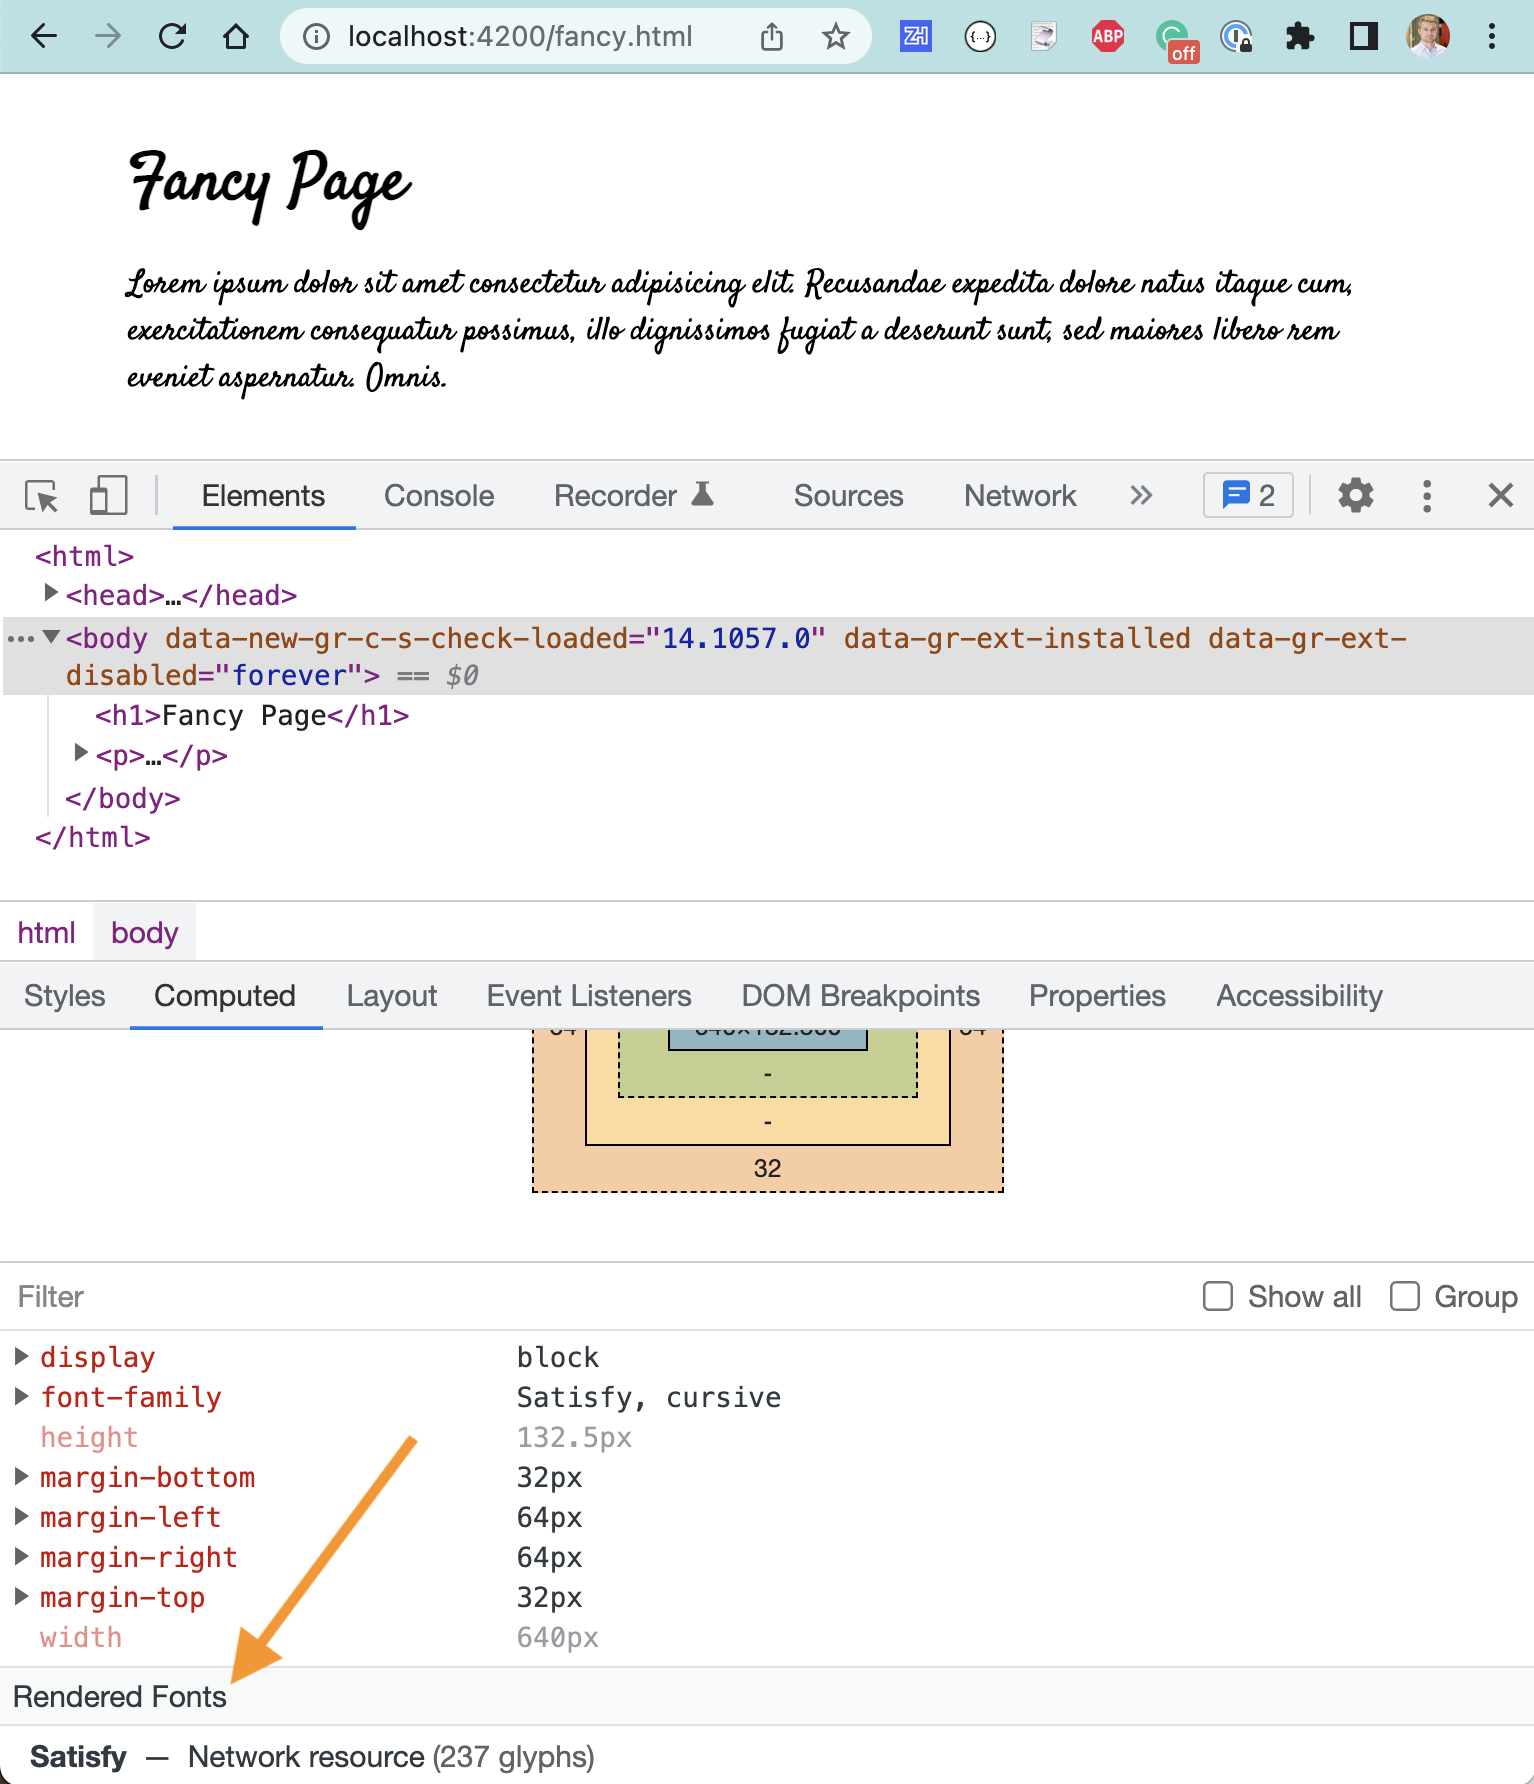 The DevTools shows the current rendered font name